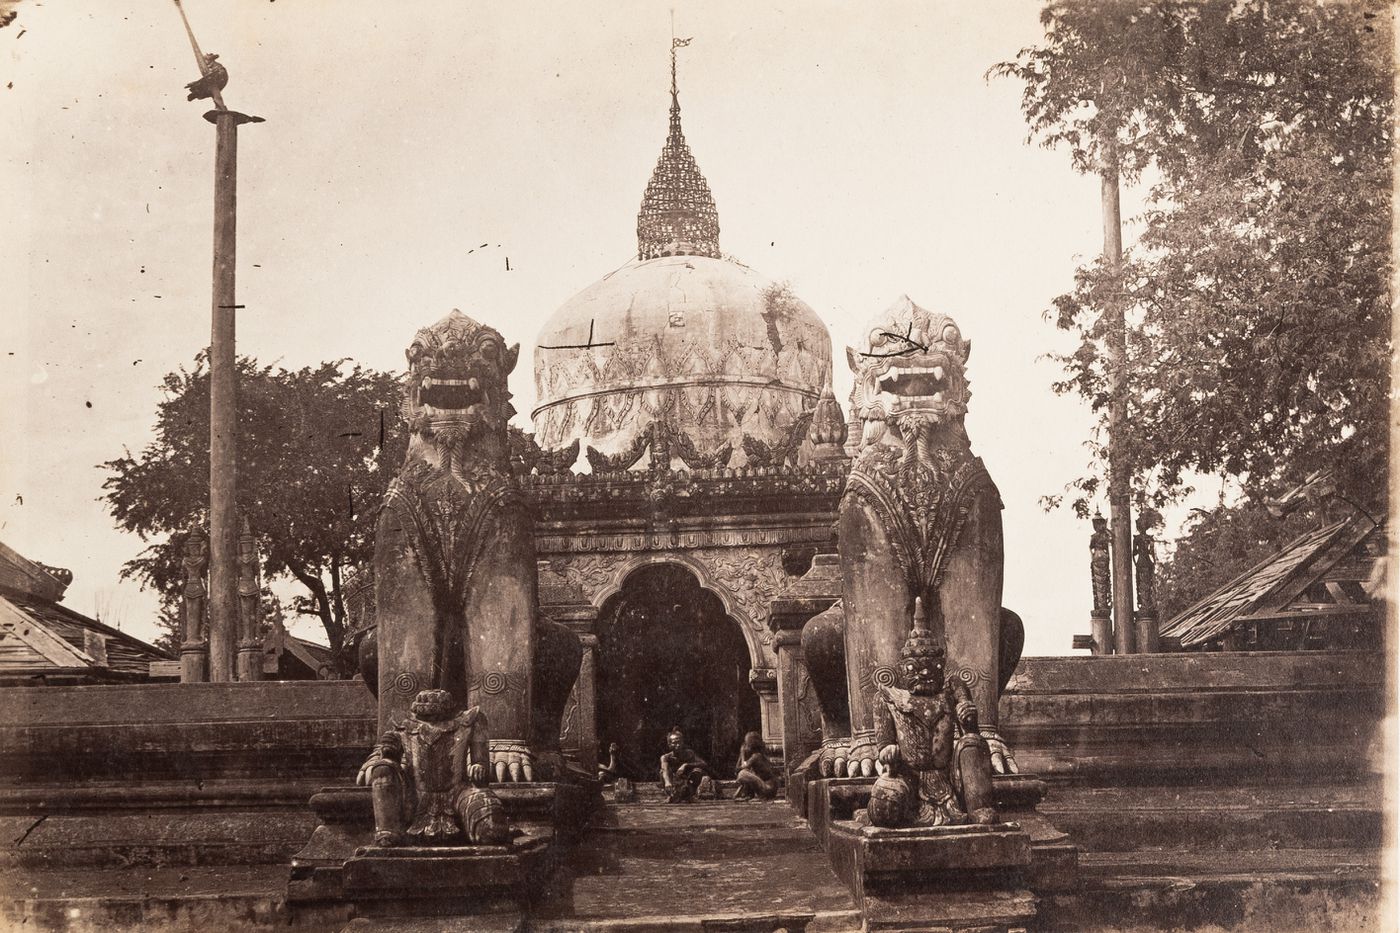 View of a pagoda flanked by two seated dragons, near Mandalay, Burma (now Myanmar)